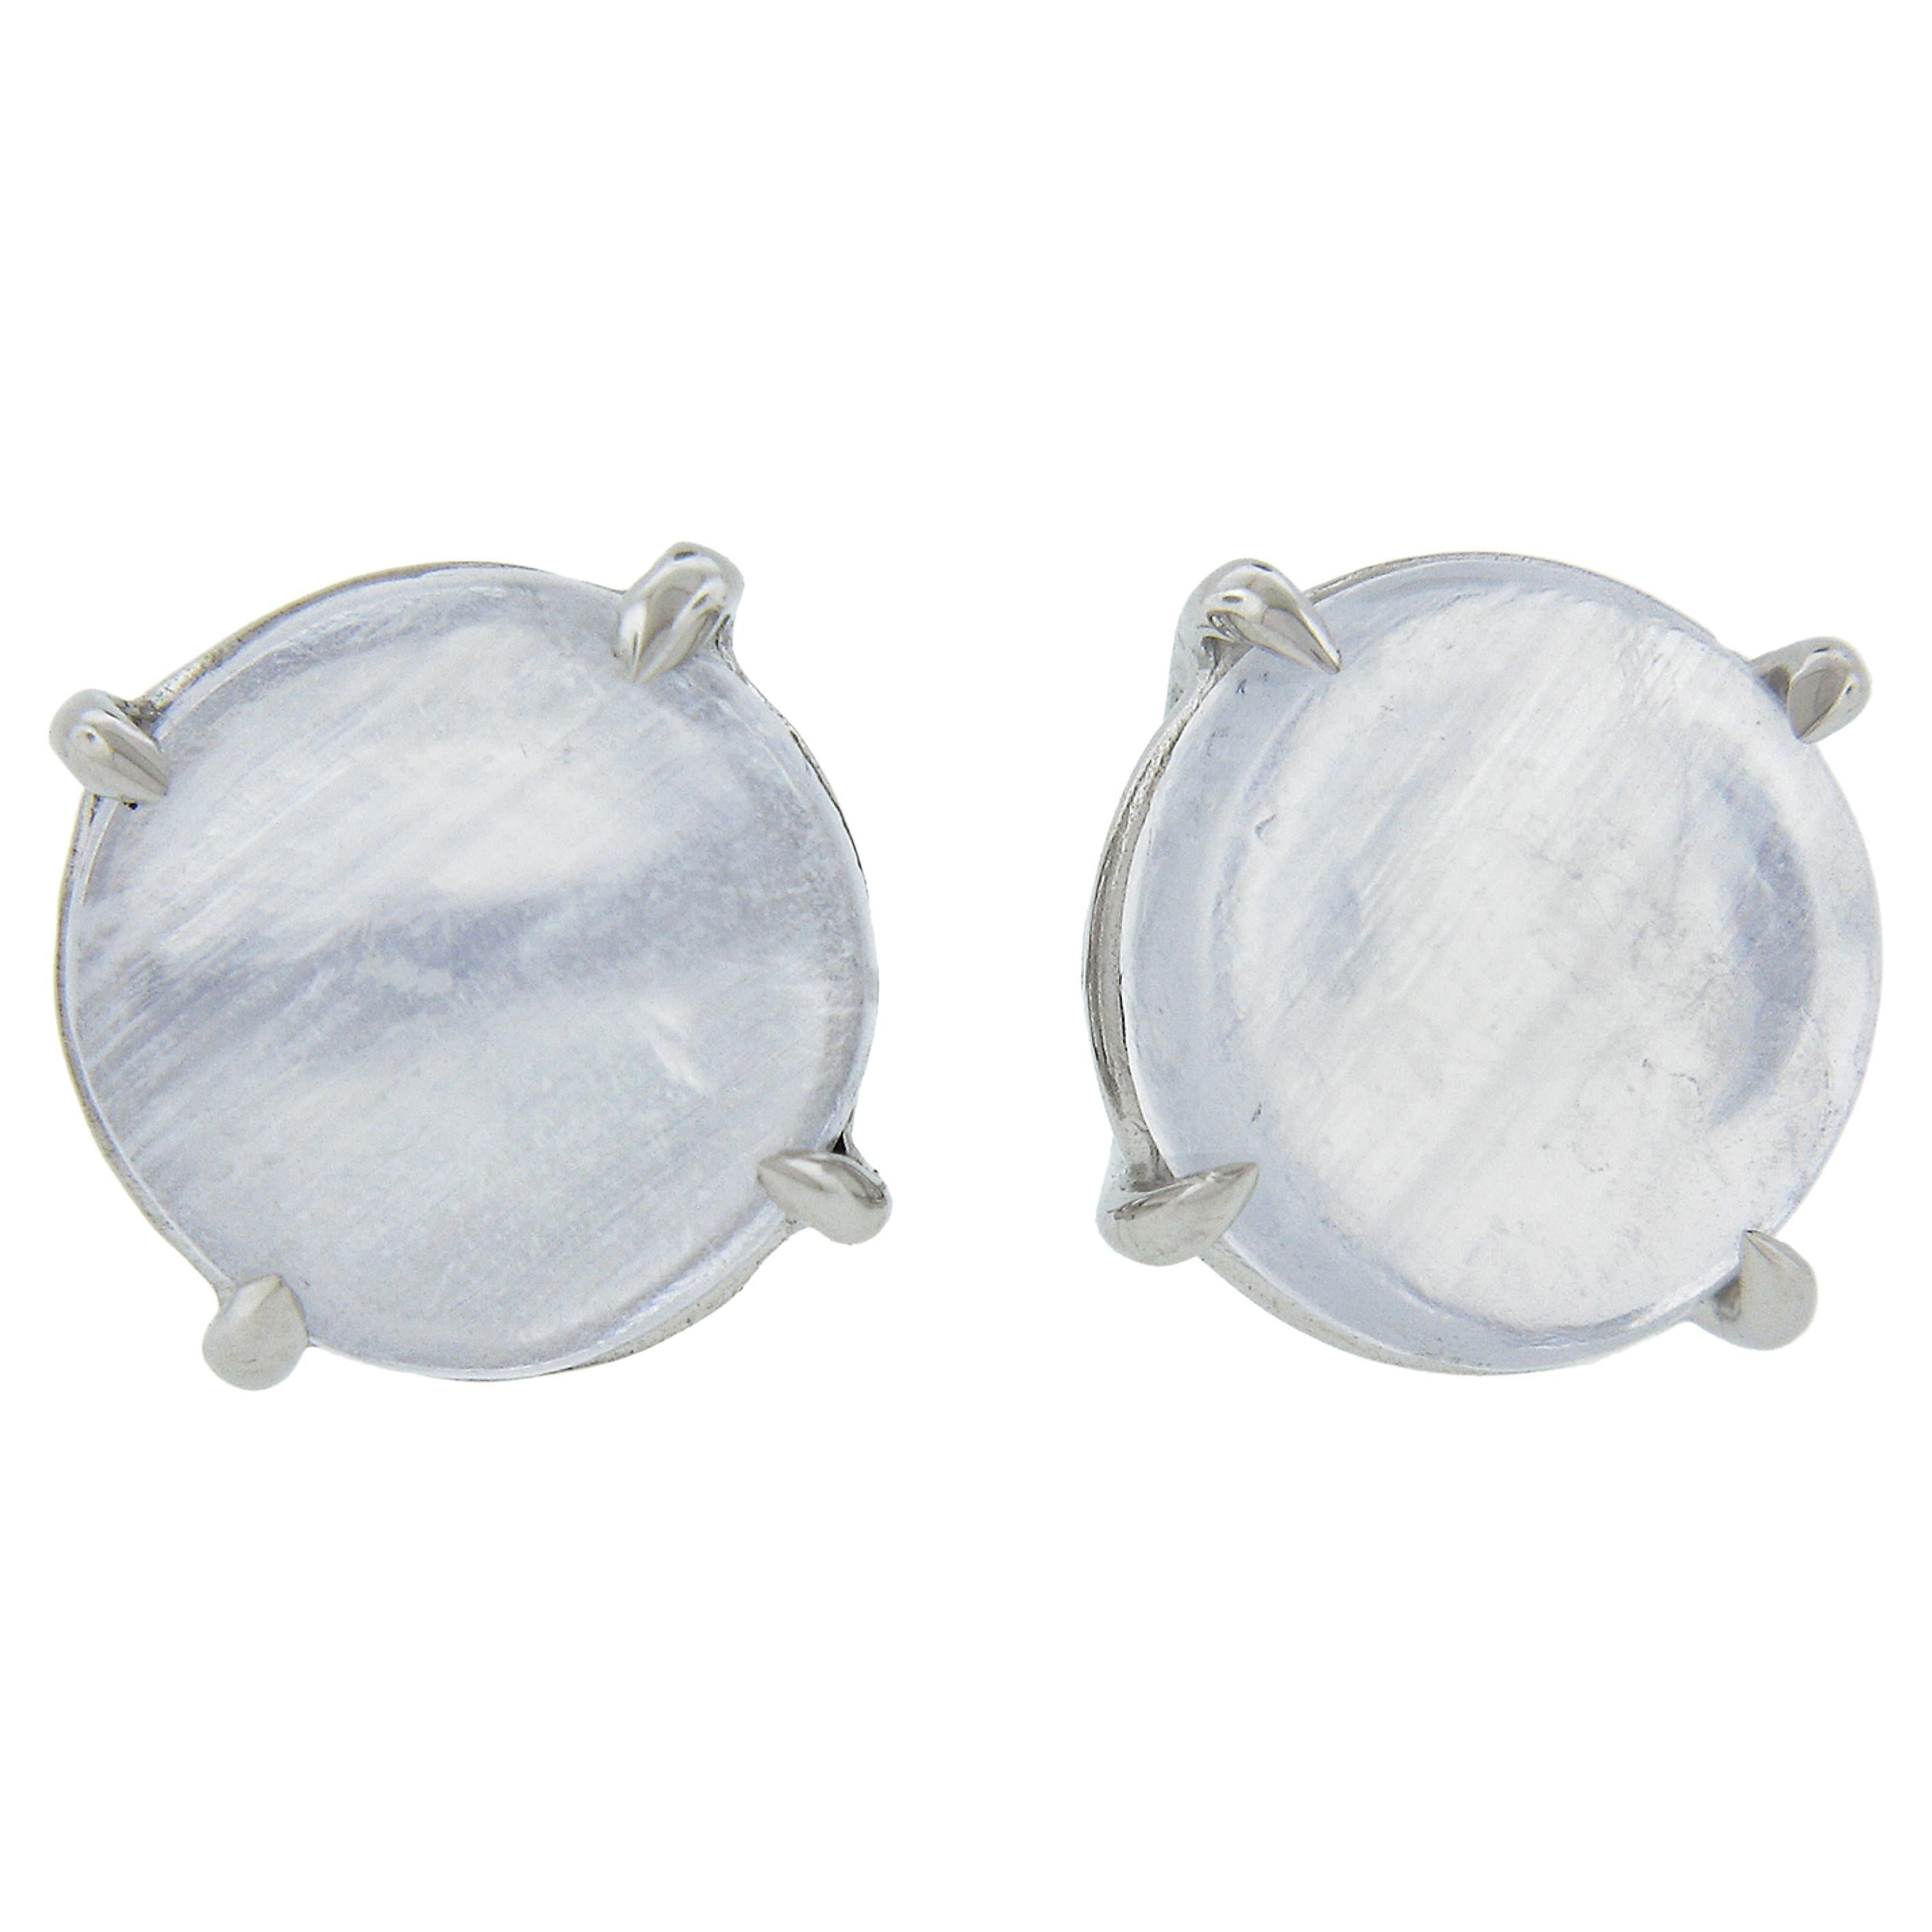 New 14k White Gold 3.54ctw Round Cabochon Blue Prong Set Moonstone Stud Earrings